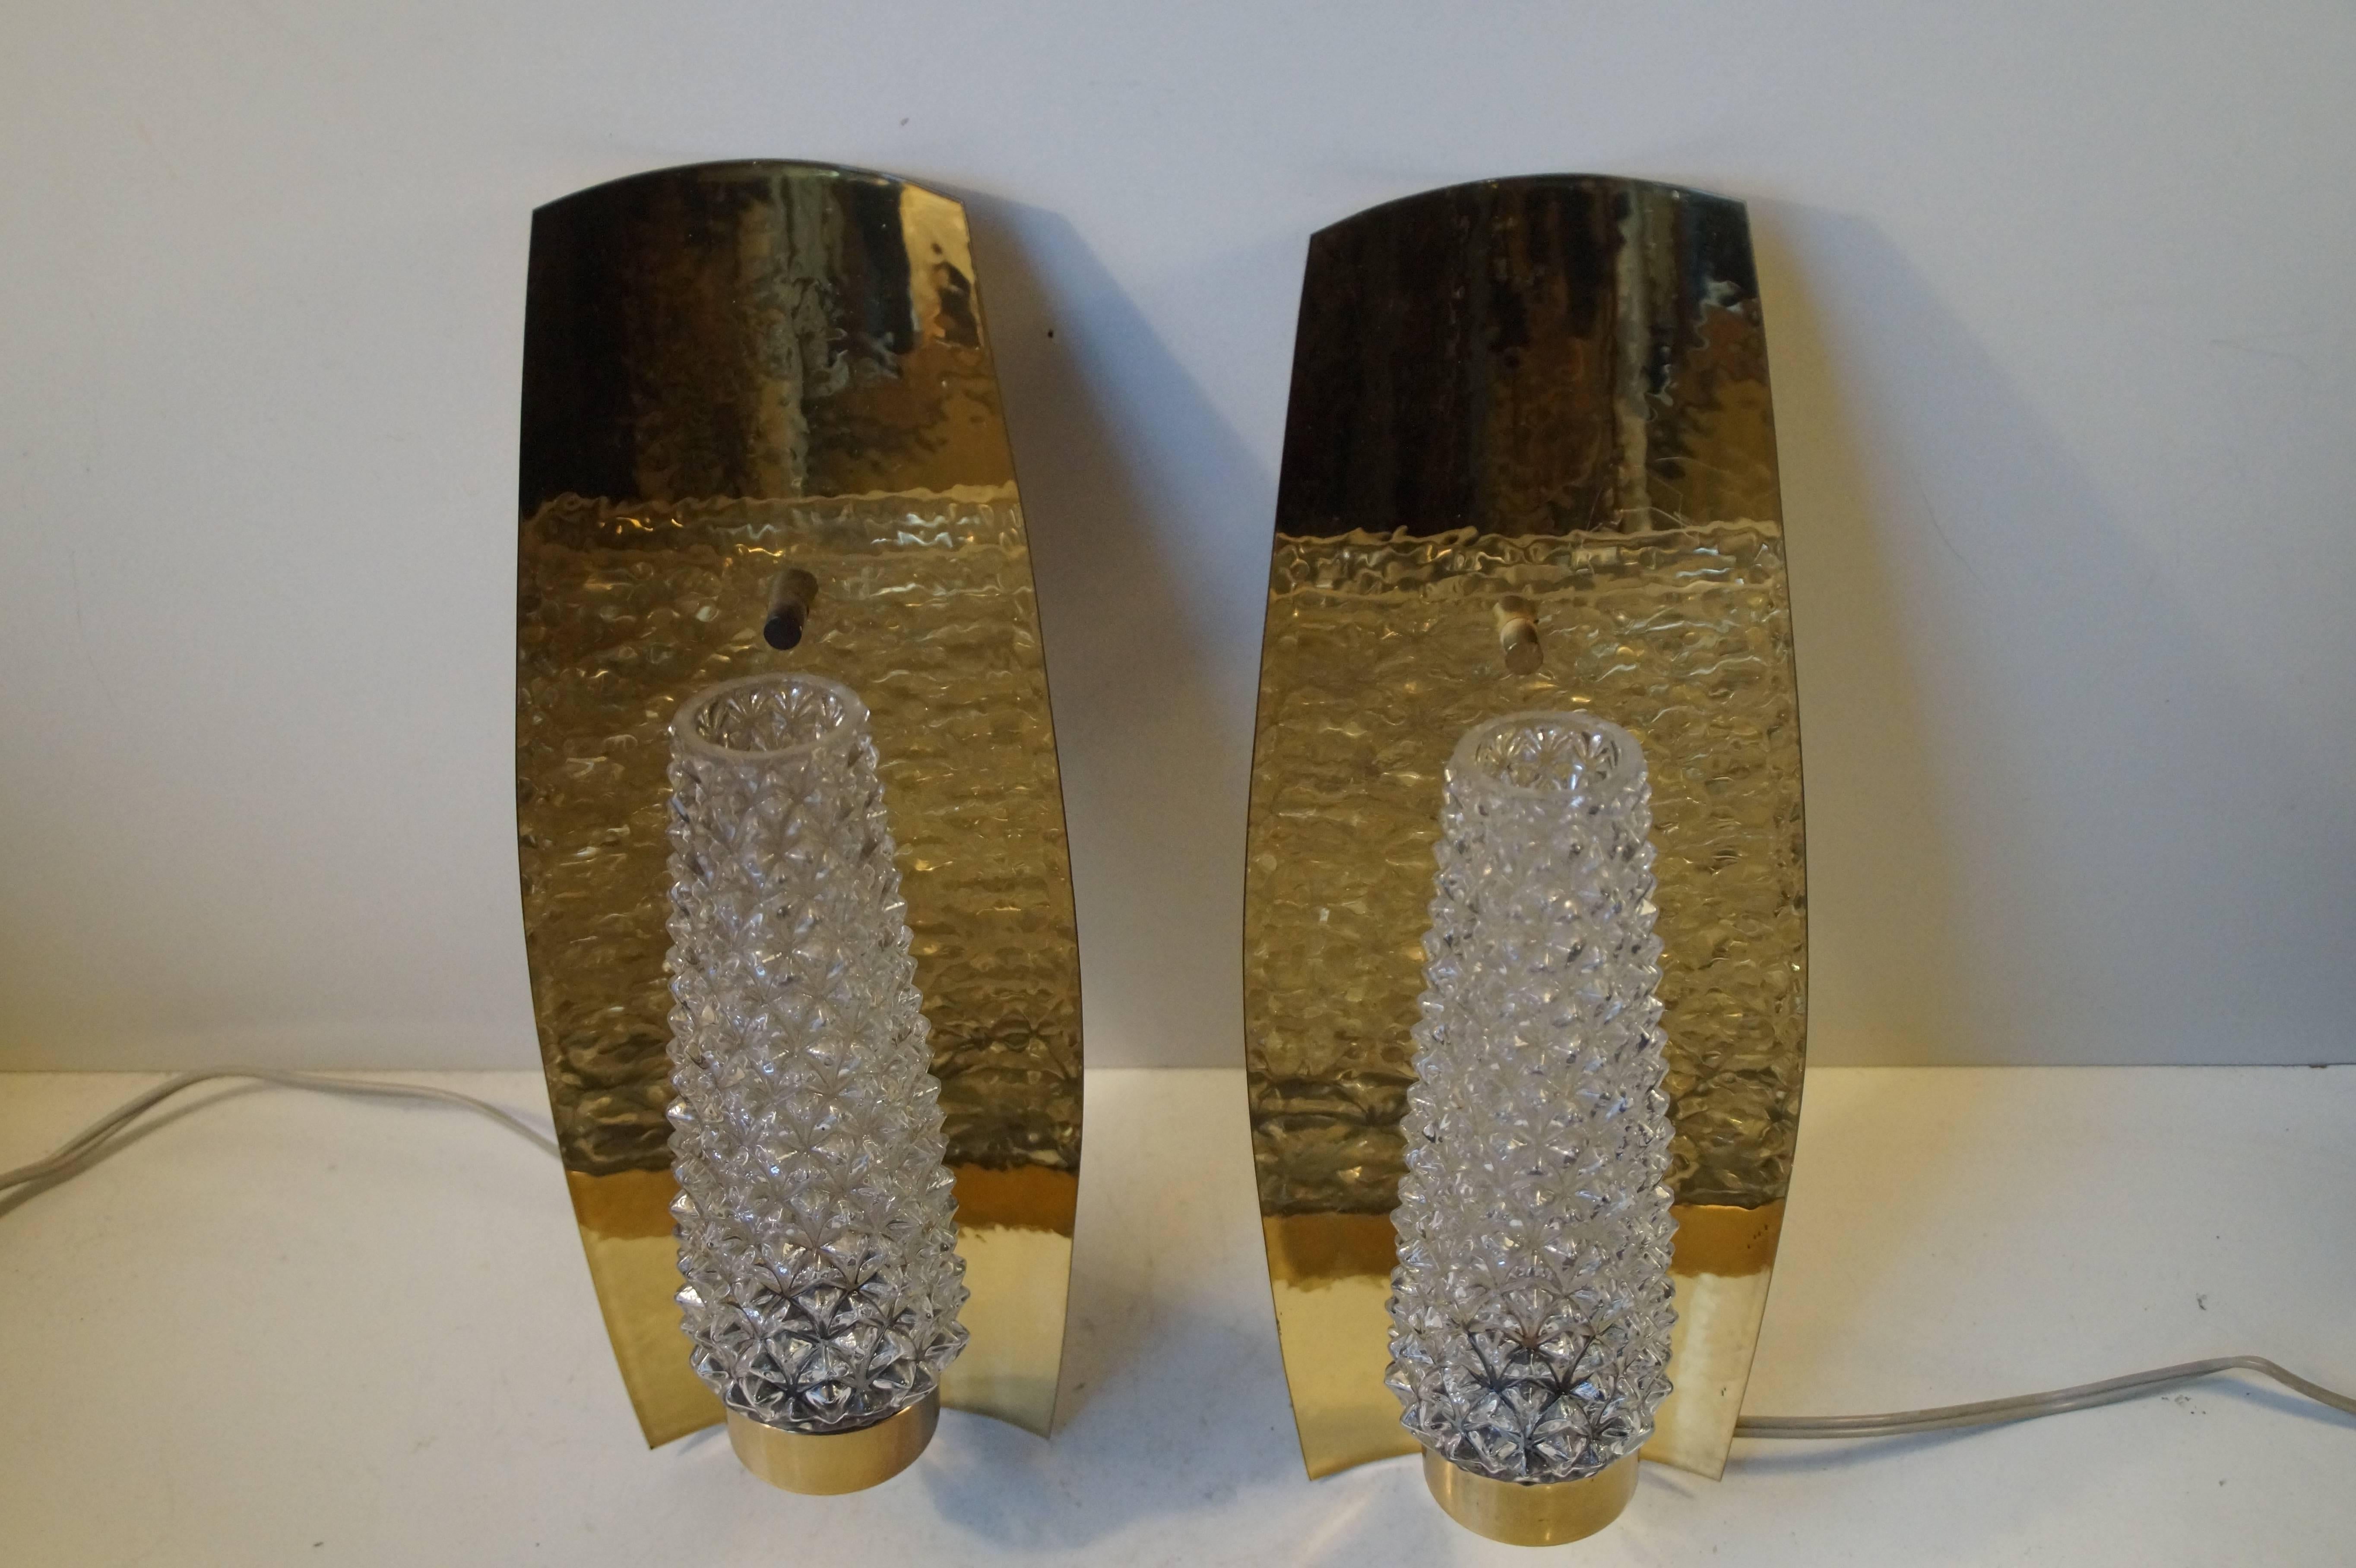 A pair of wall lamps in polished and slightly hammered brass with crystal shading by Hags. Beautiful clean design and splendid craftsmanship. Stamped: HAGS, 8180. Measurements: H 13 inches (33 cm), W 5 inches (12.5 cm). The price is for the Pair.